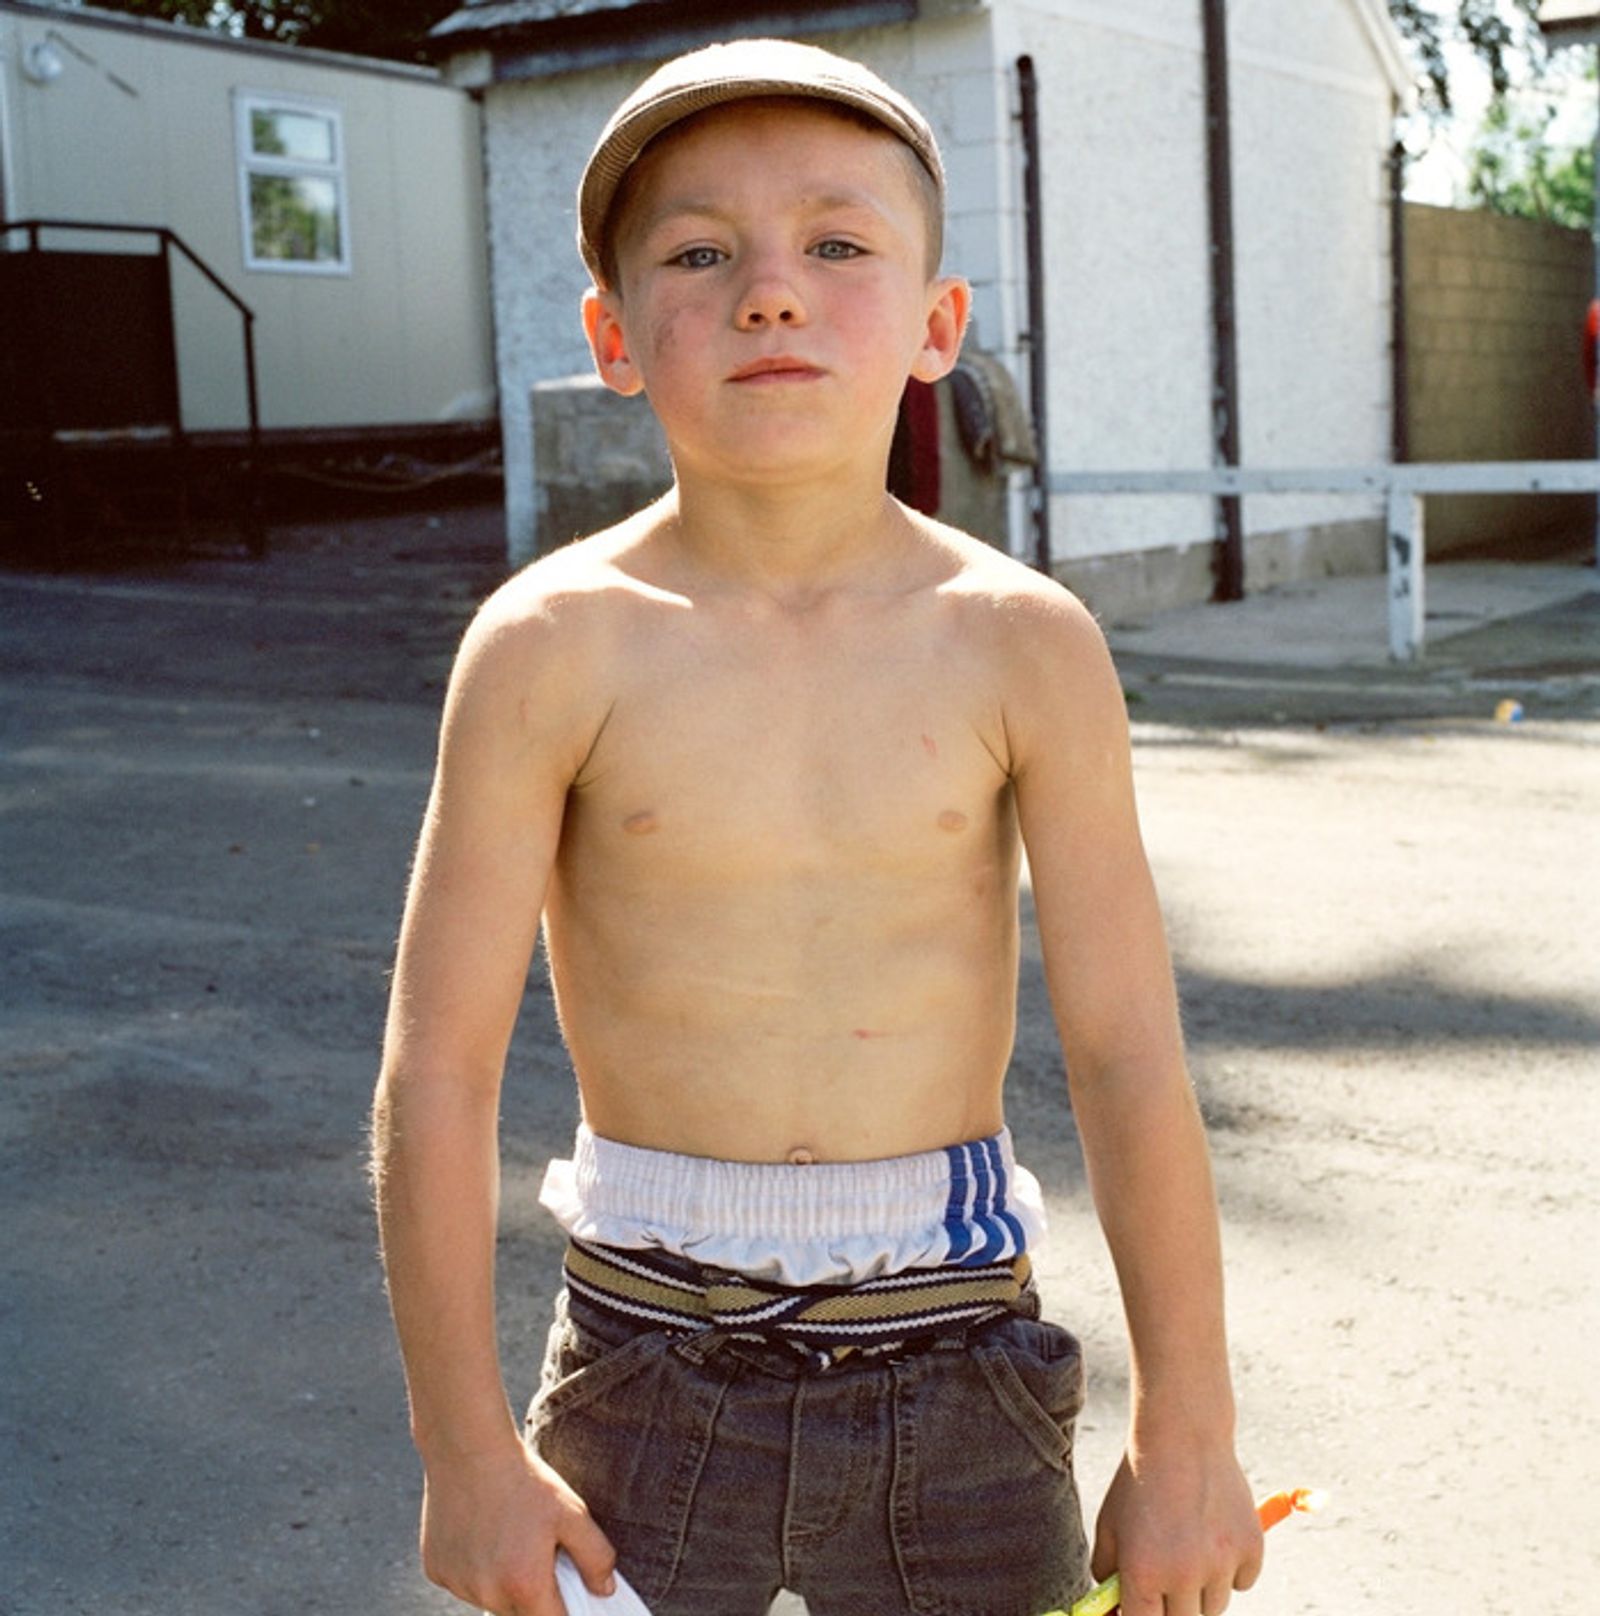 © Ciara Crocker - Image from the "And that's the truth." A Portrait of Irish Travellers photography project